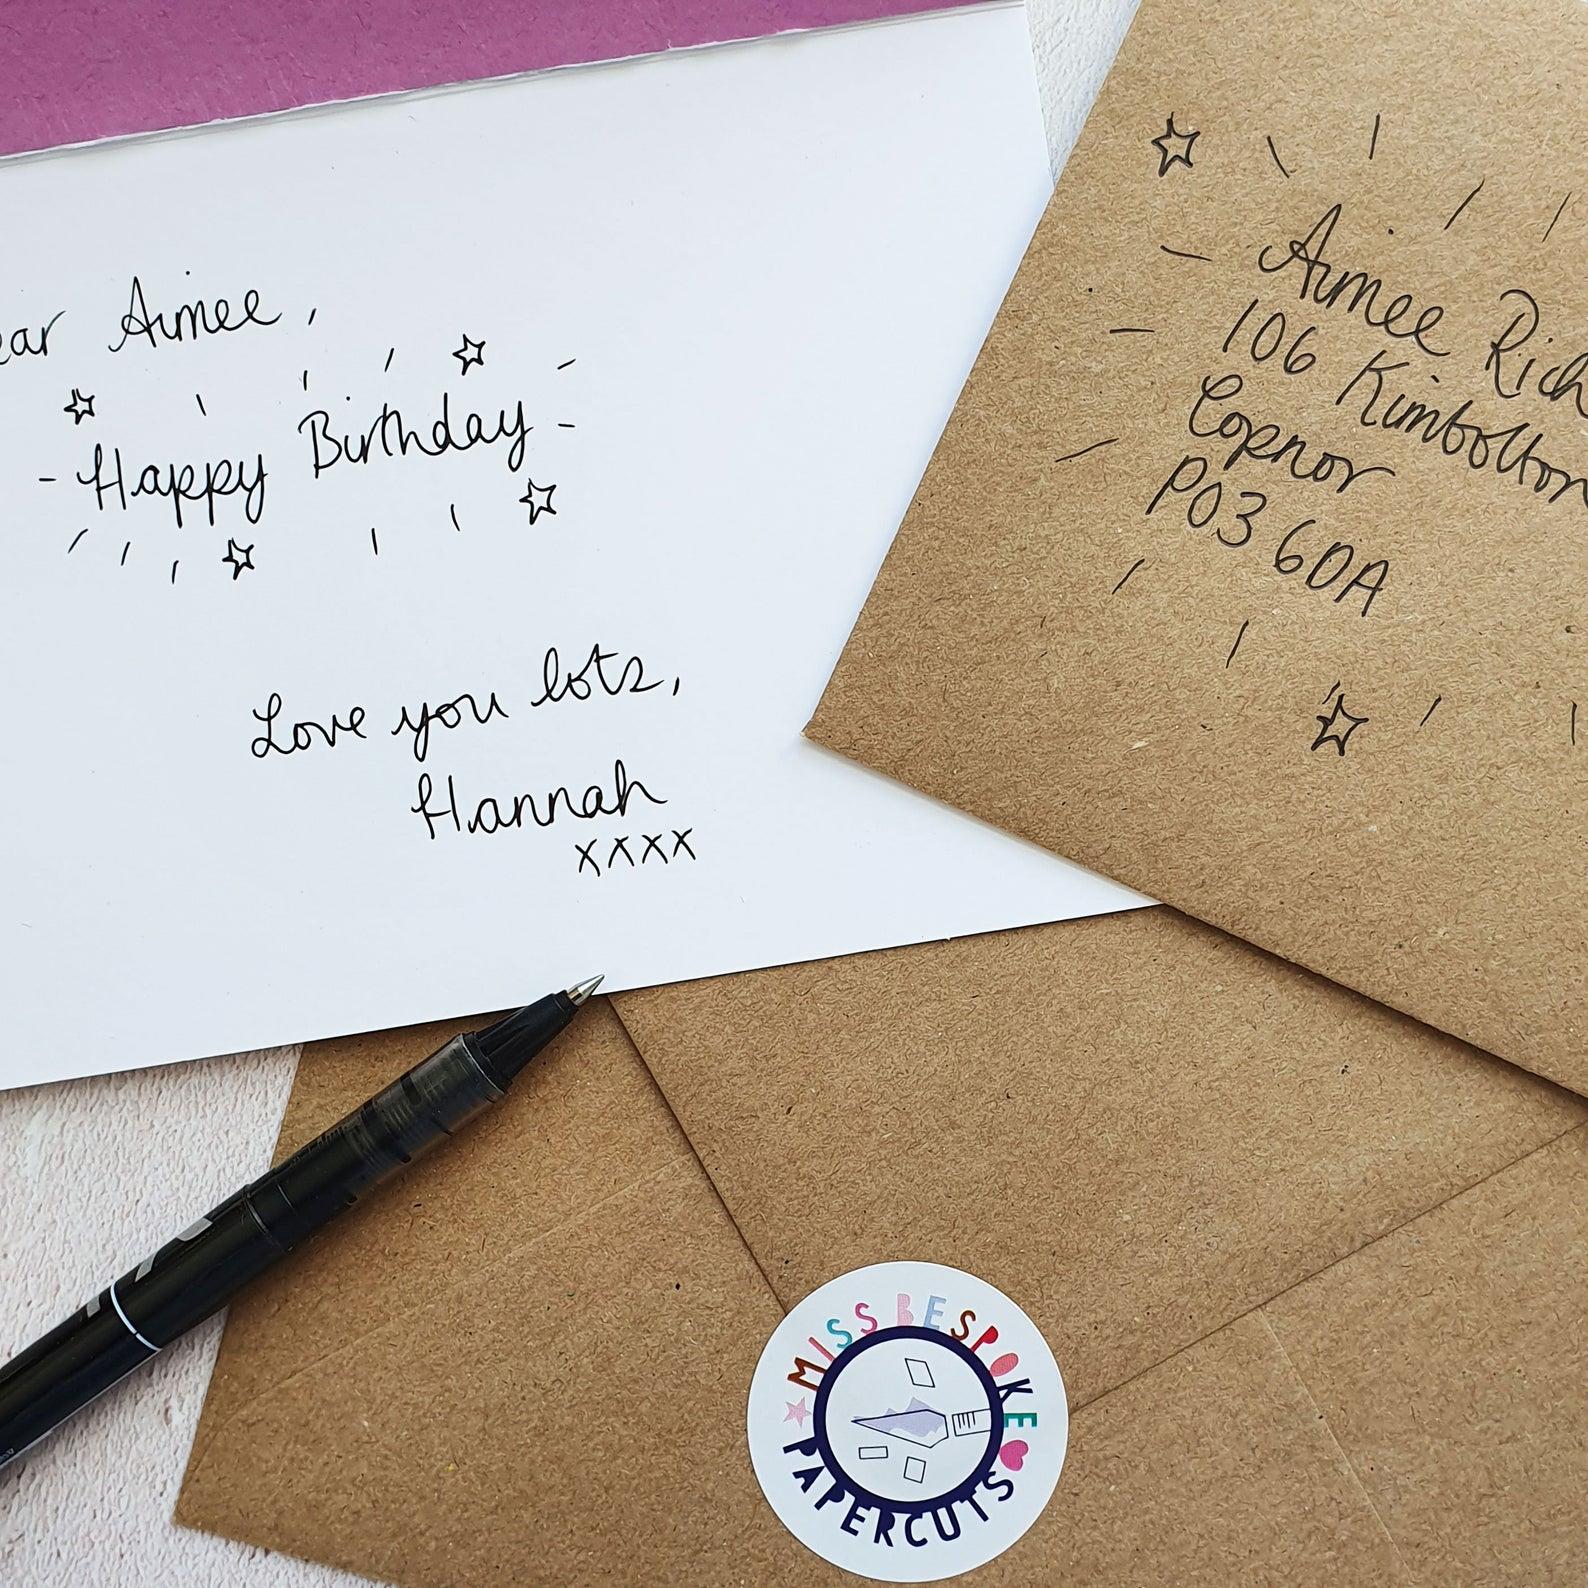 Photo of handwritten message in a card with an addressed envelope for the 'send direct' option